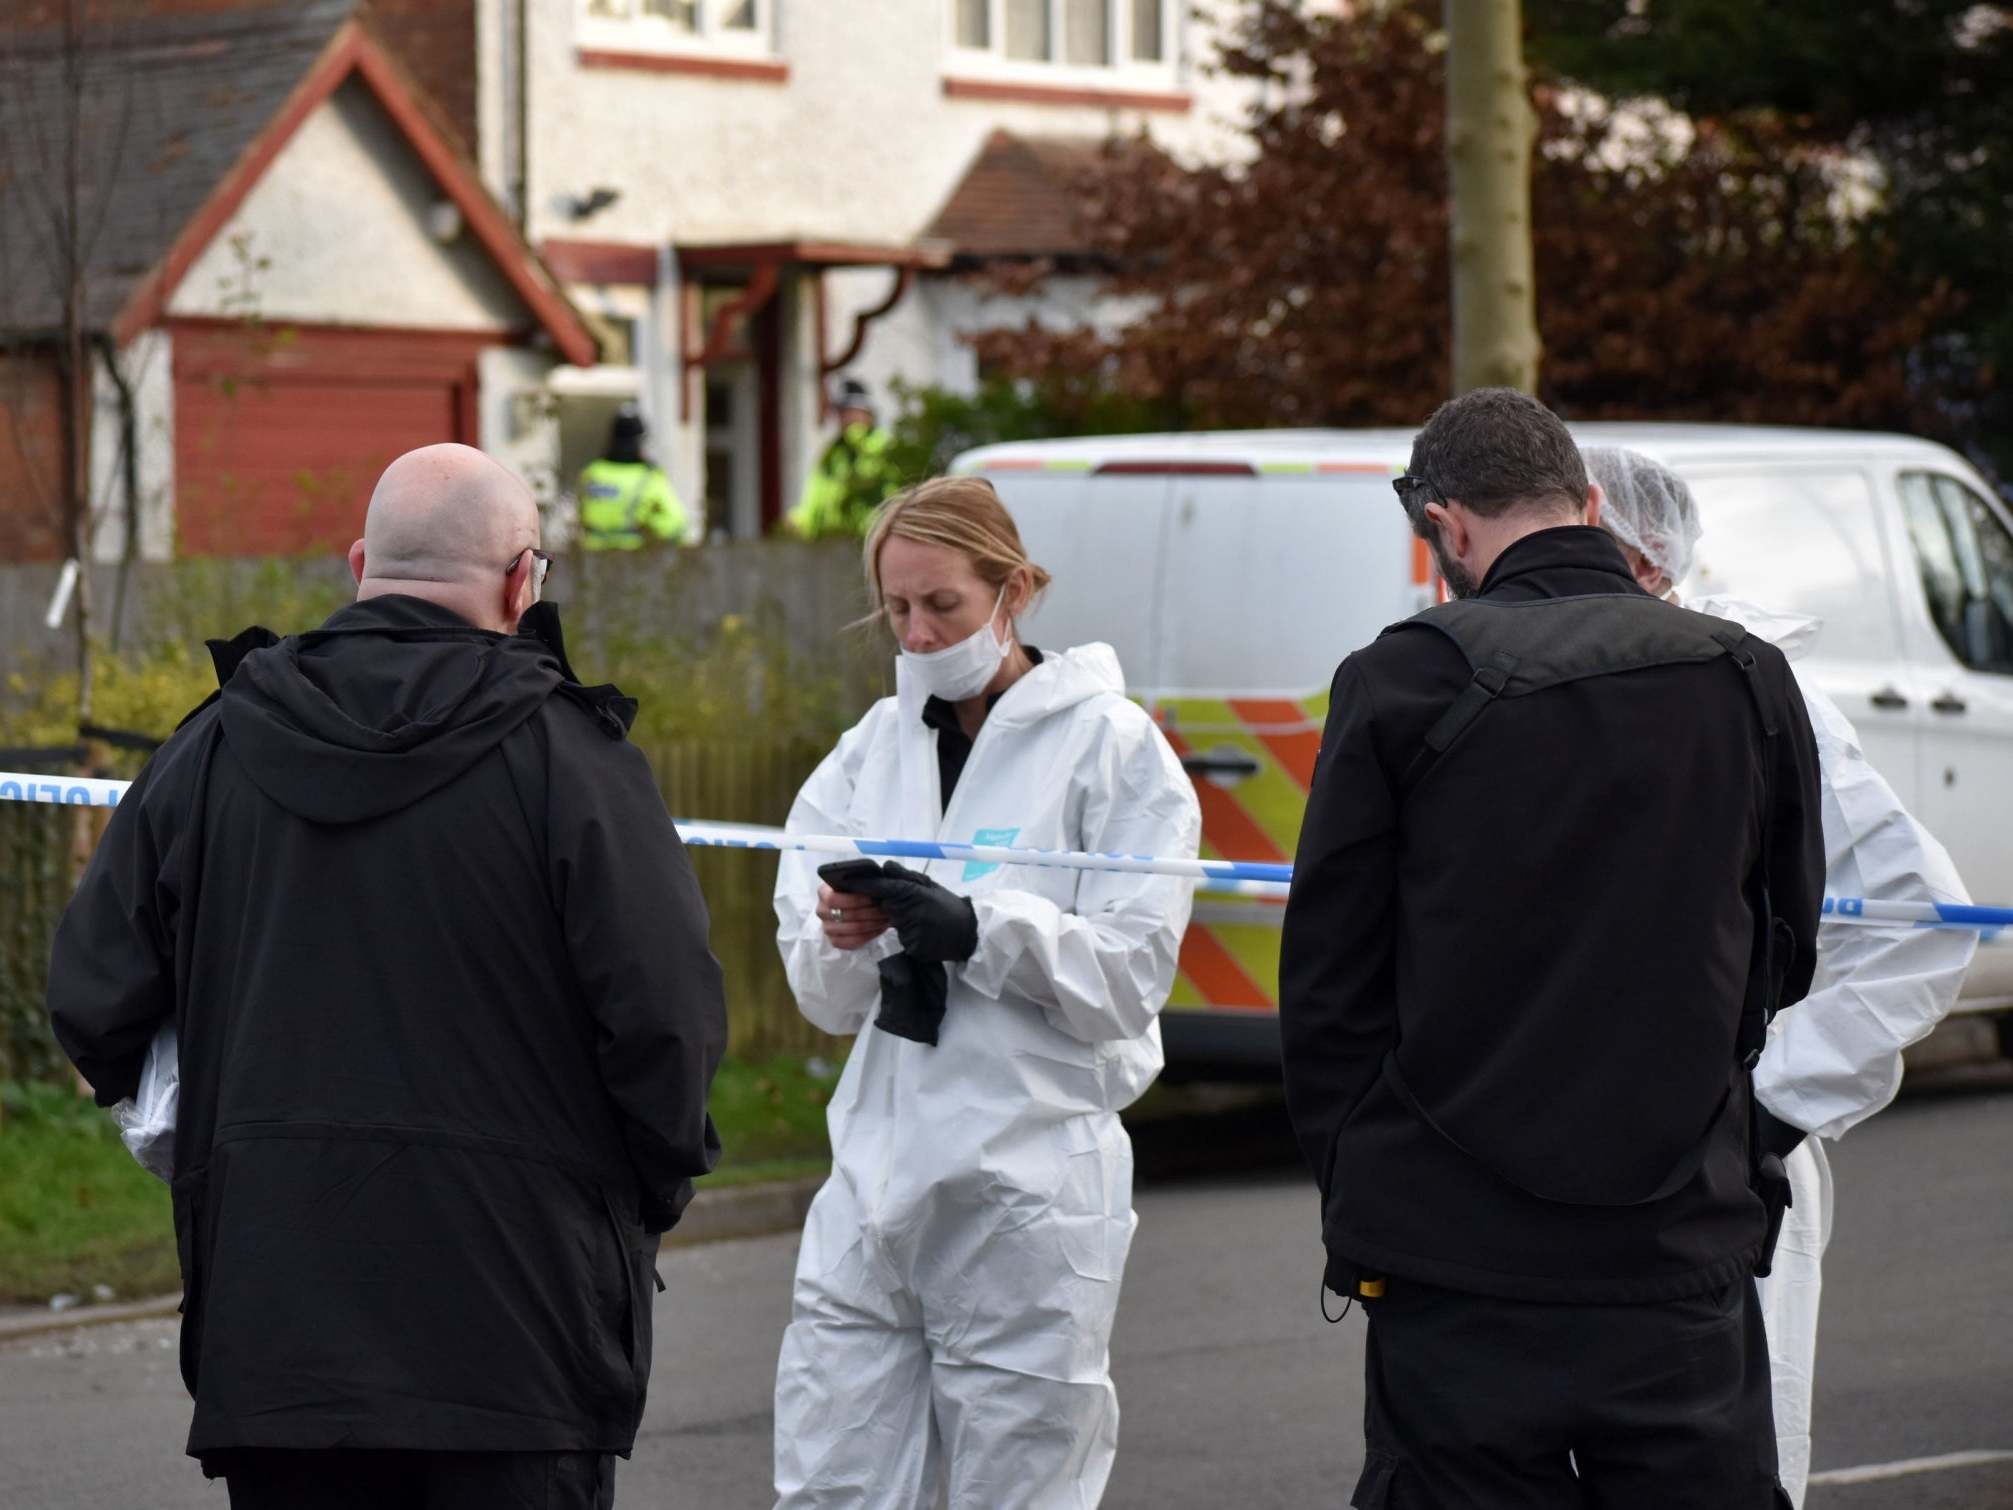 Forensic officers at the scene of a double murder investigation in Moseley, Birmingham